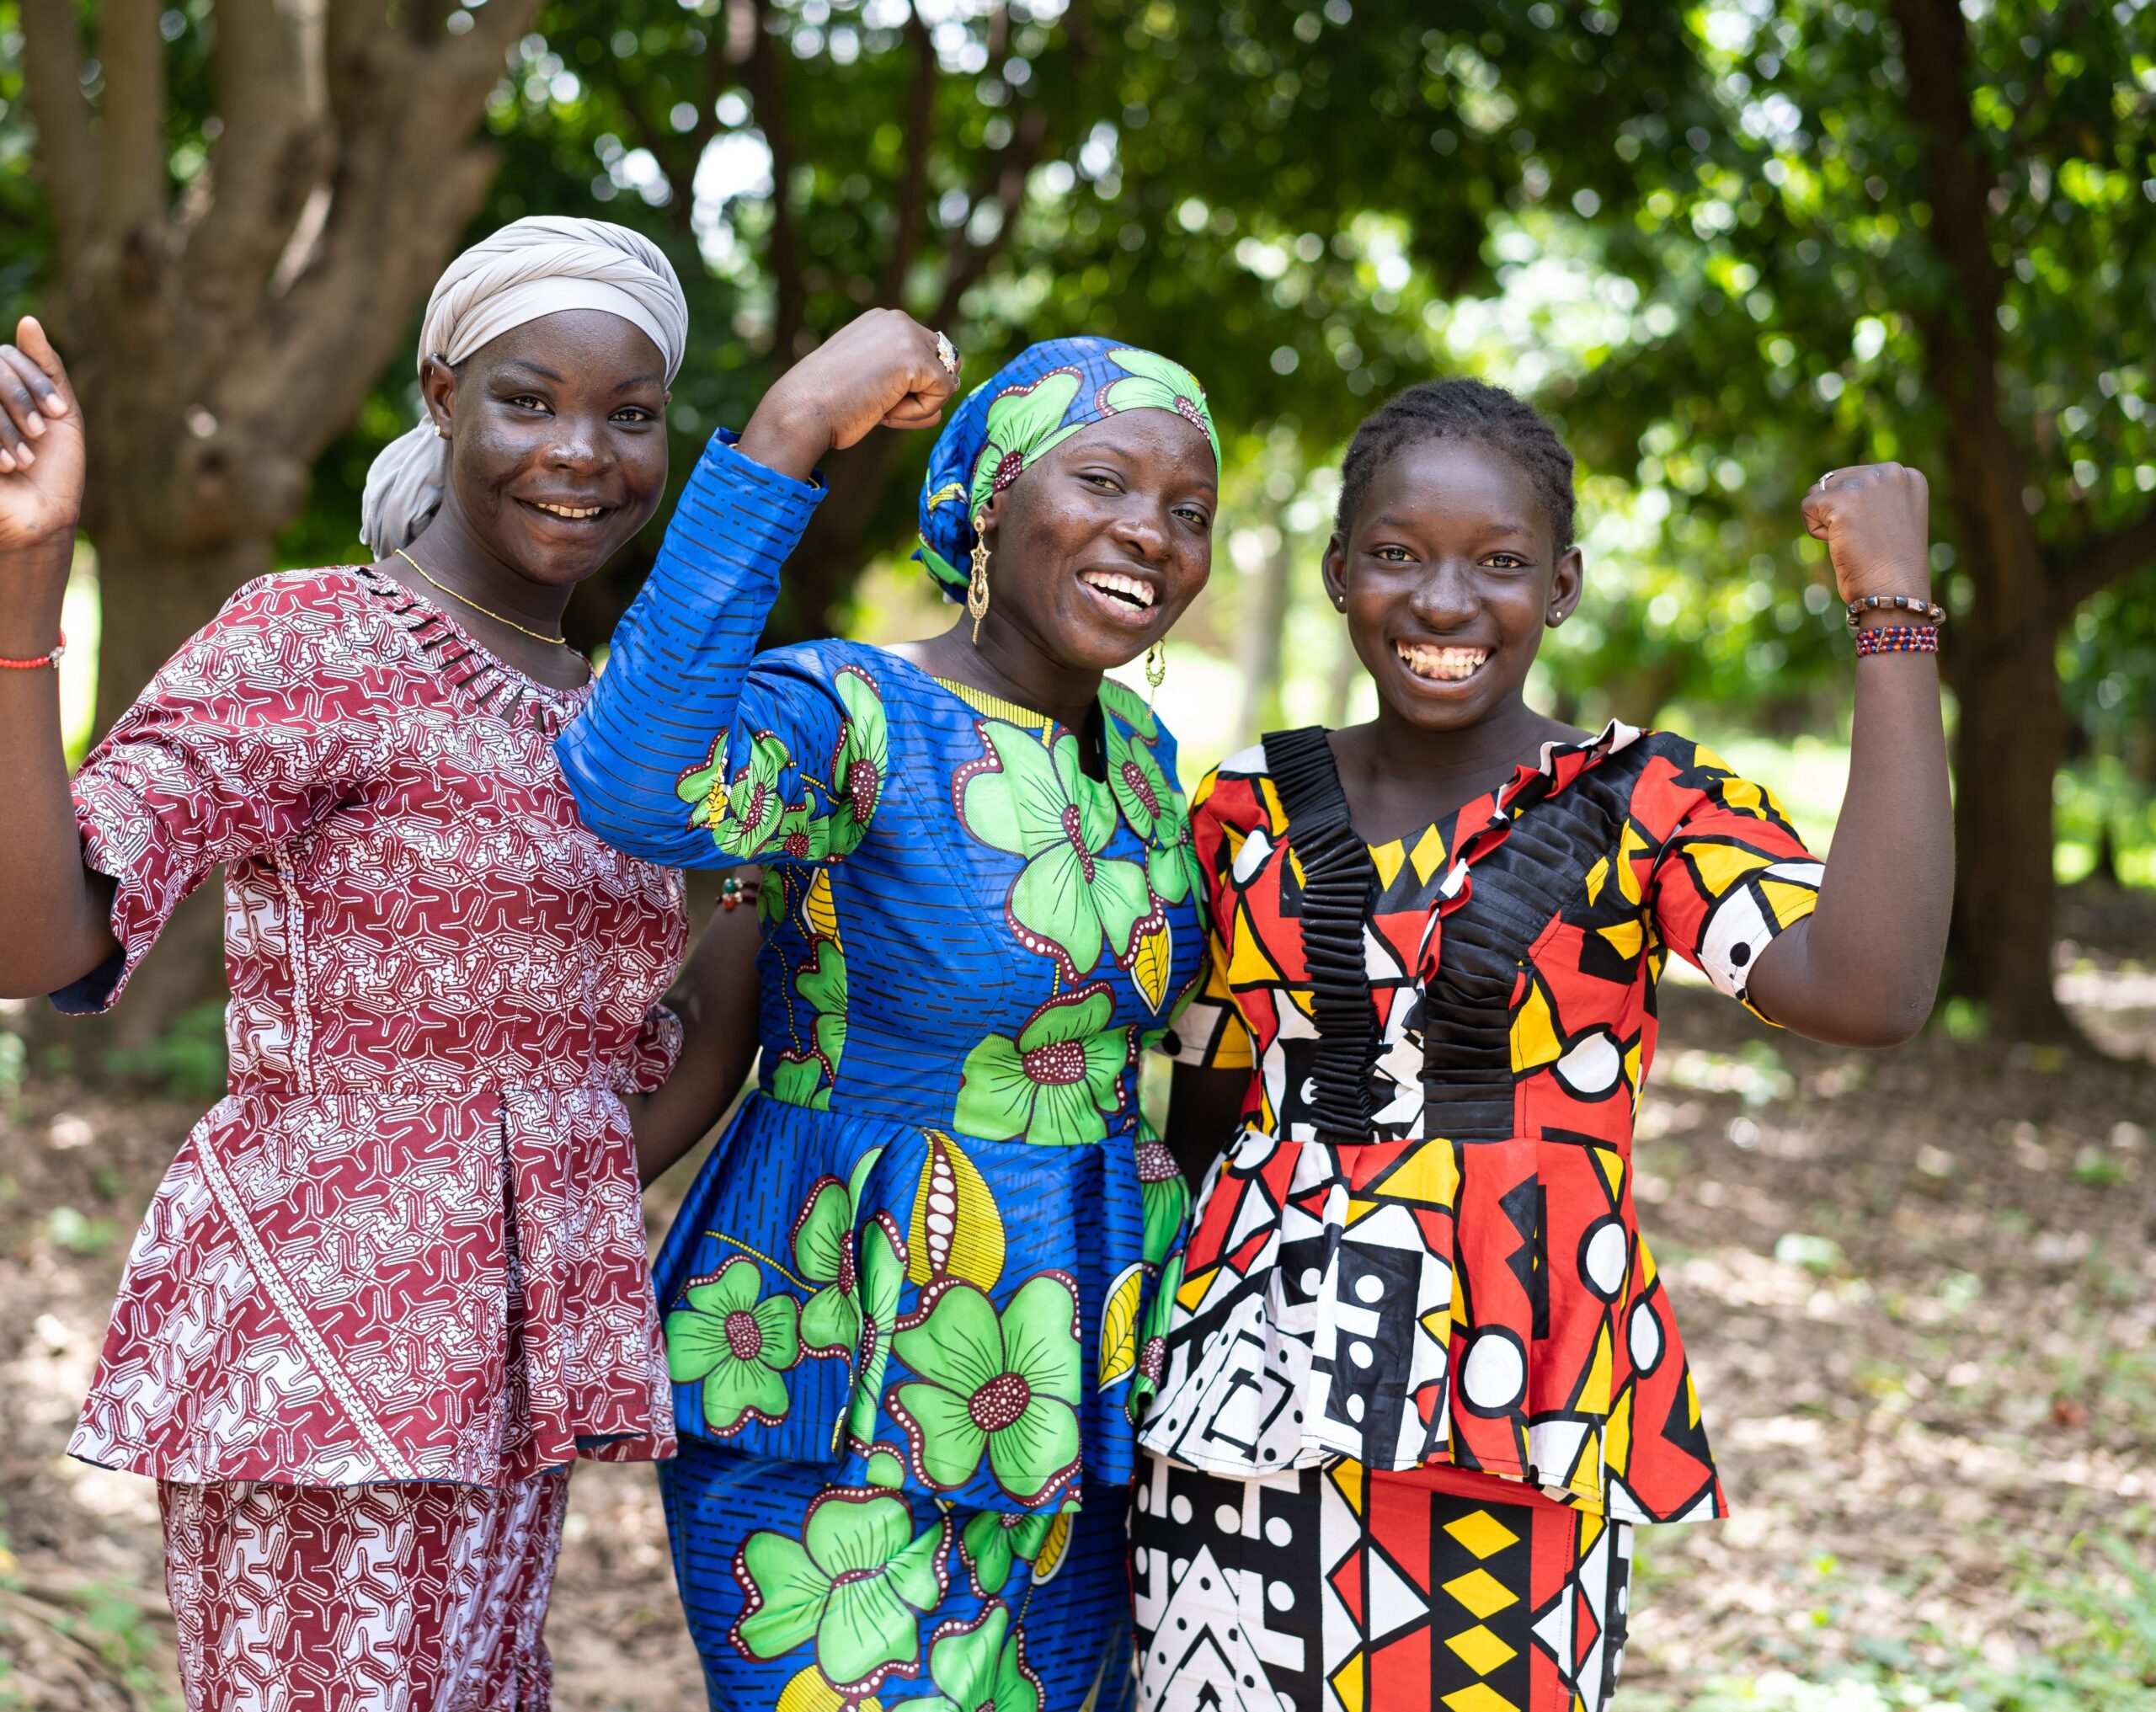 Young African Mother in center with Daughters on either side, all smiling in colorful African print dresses, each with one arm raised in triumph.